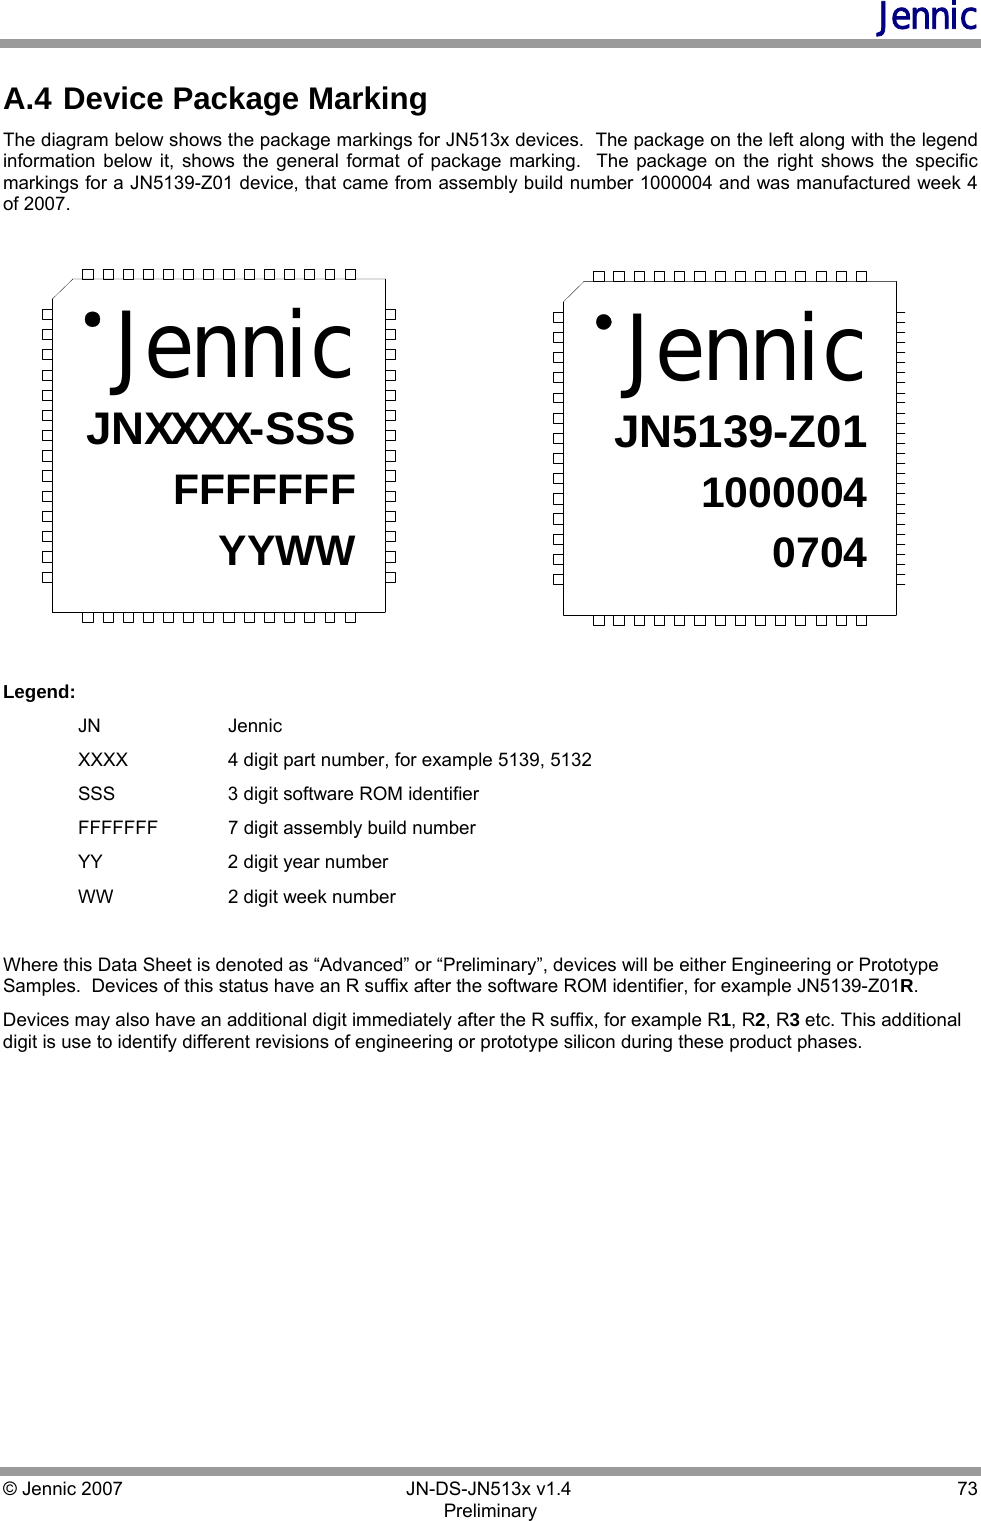 Jennic © Jennic 2007        JN-DS-JN513x v1.4  73 Preliminary A.4  Device Package Marking The diagram below shows the package markings for JN513x devices.  The package on the left along with the legend information below it, shows the general format of package marking.  The package on the right shows the specific markings for a JN5139-Z01 device, that came from assembly build number 1000004 and was manufactured week 4 of 2007.  JennicJNXXXX-SSSFFFFFFFYYWWJennicJN5139-Z0110000040704 Legend:  JN  Jennic   XXXX    4 digit part number, for example 5139, 5132   SSS    3 digit software ROM identifier   FFFFFFF  7 digit assembly build number  YY  2 digit year number  WW  2 digit week number  Where this Data Sheet is denoted as “Advanced” or “Preliminary”, devices will be either Engineering or Prototype Samples.  Devices of this status have an R suffix after the software ROM identifier, for example JN5139-Z01R. Devices may also have an additional digit immediately after the R suffix, for example R1, R2, R3 etc. This additional digit is use to identify different revisions of engineering or prototype silicon during these product phases. 